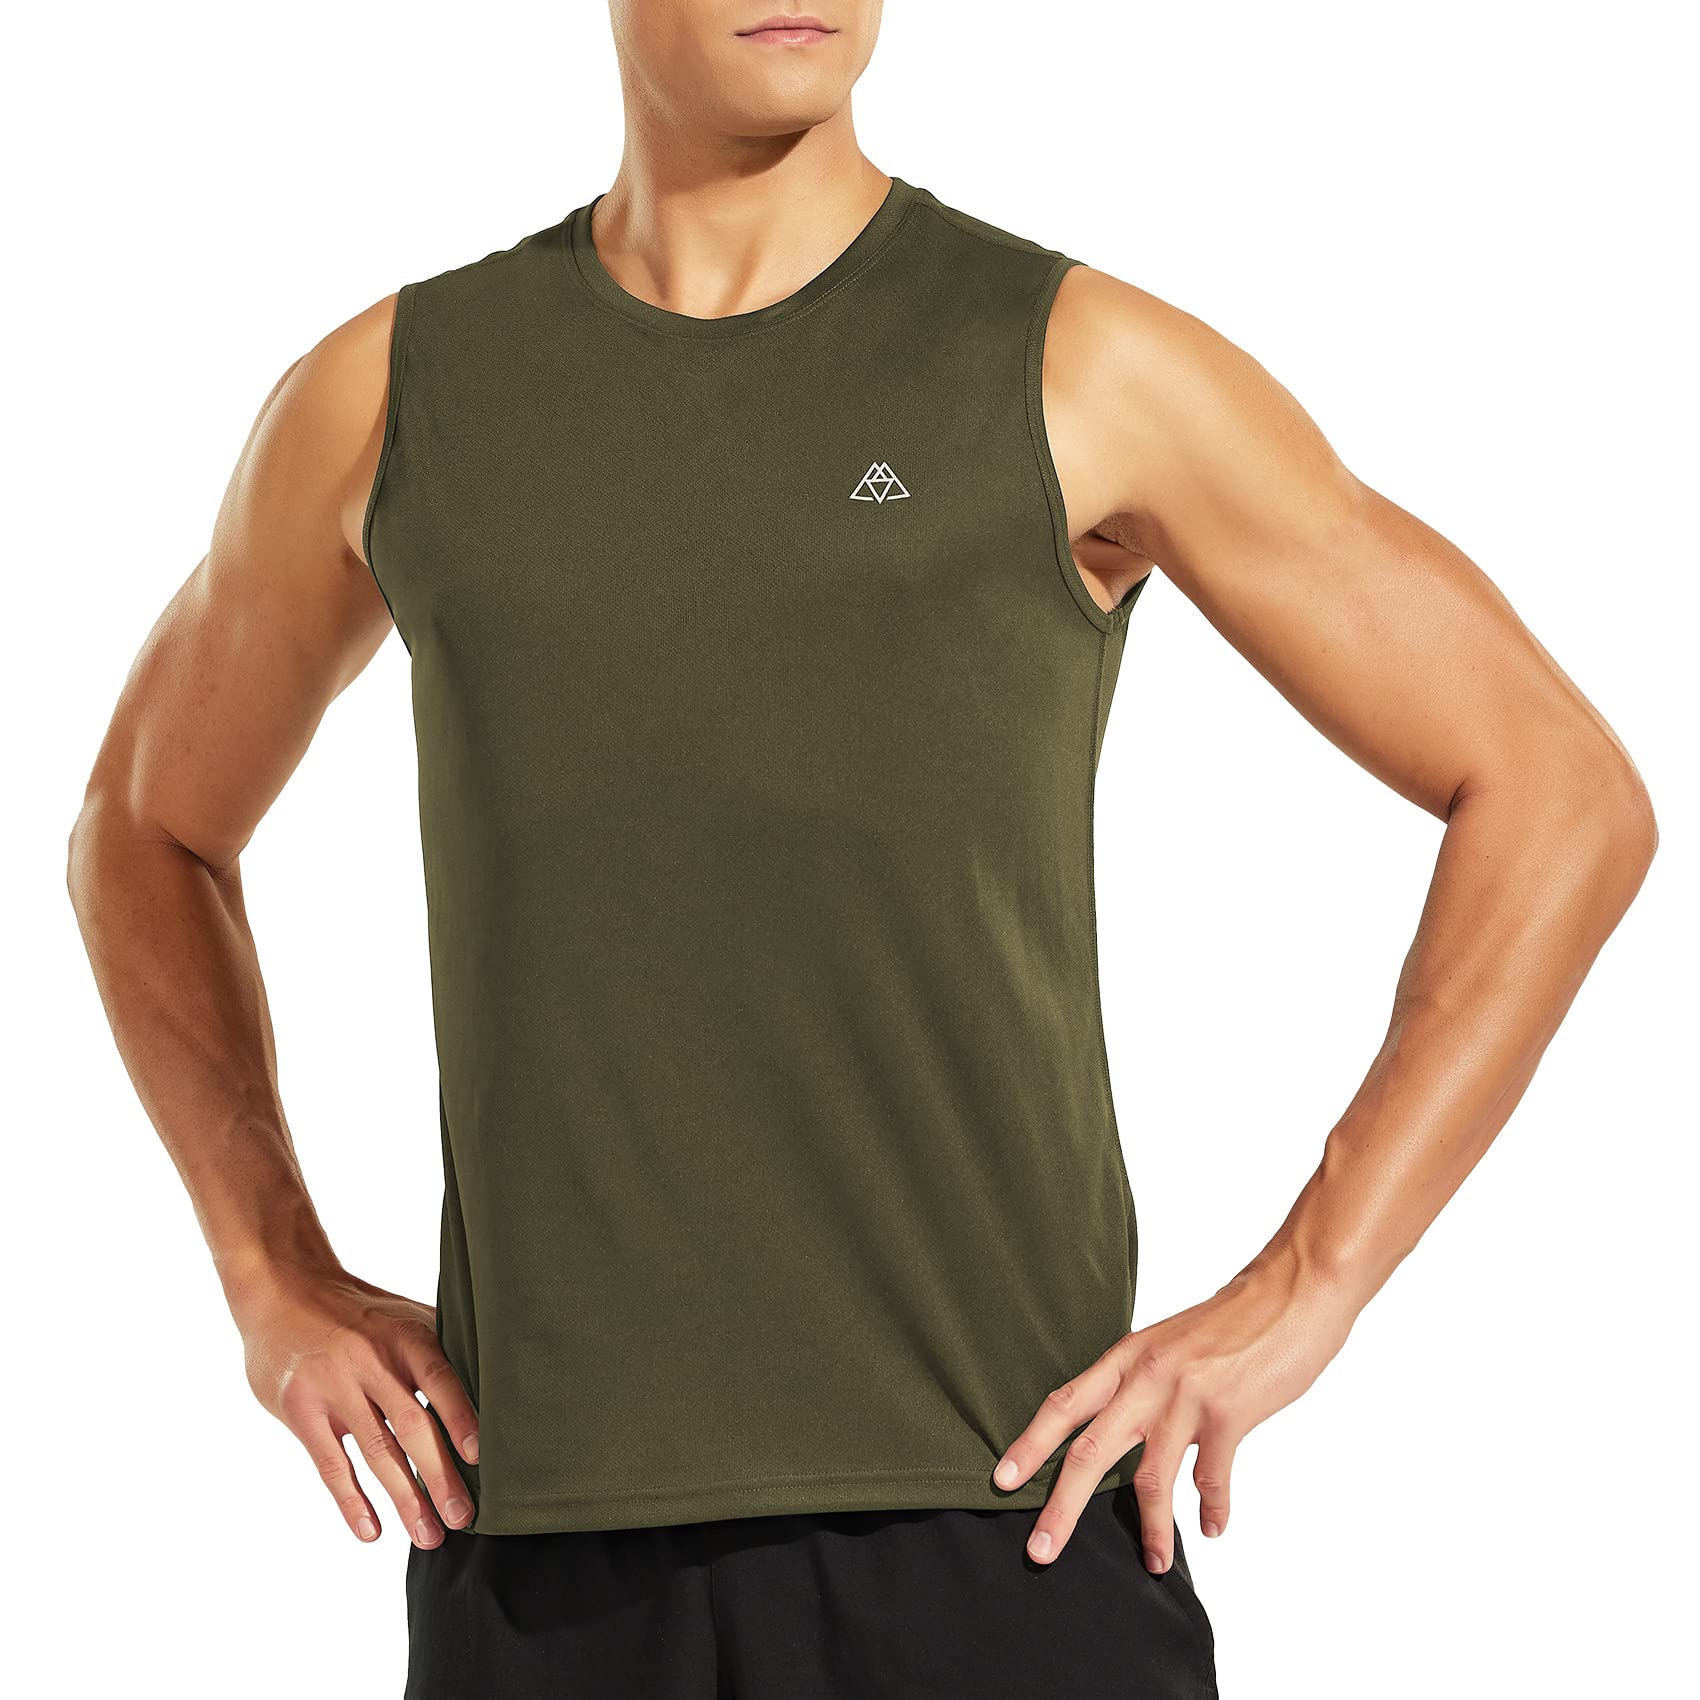 Haimont Men's Sleeveless Athletic Shirts Dry Fit Tank Top